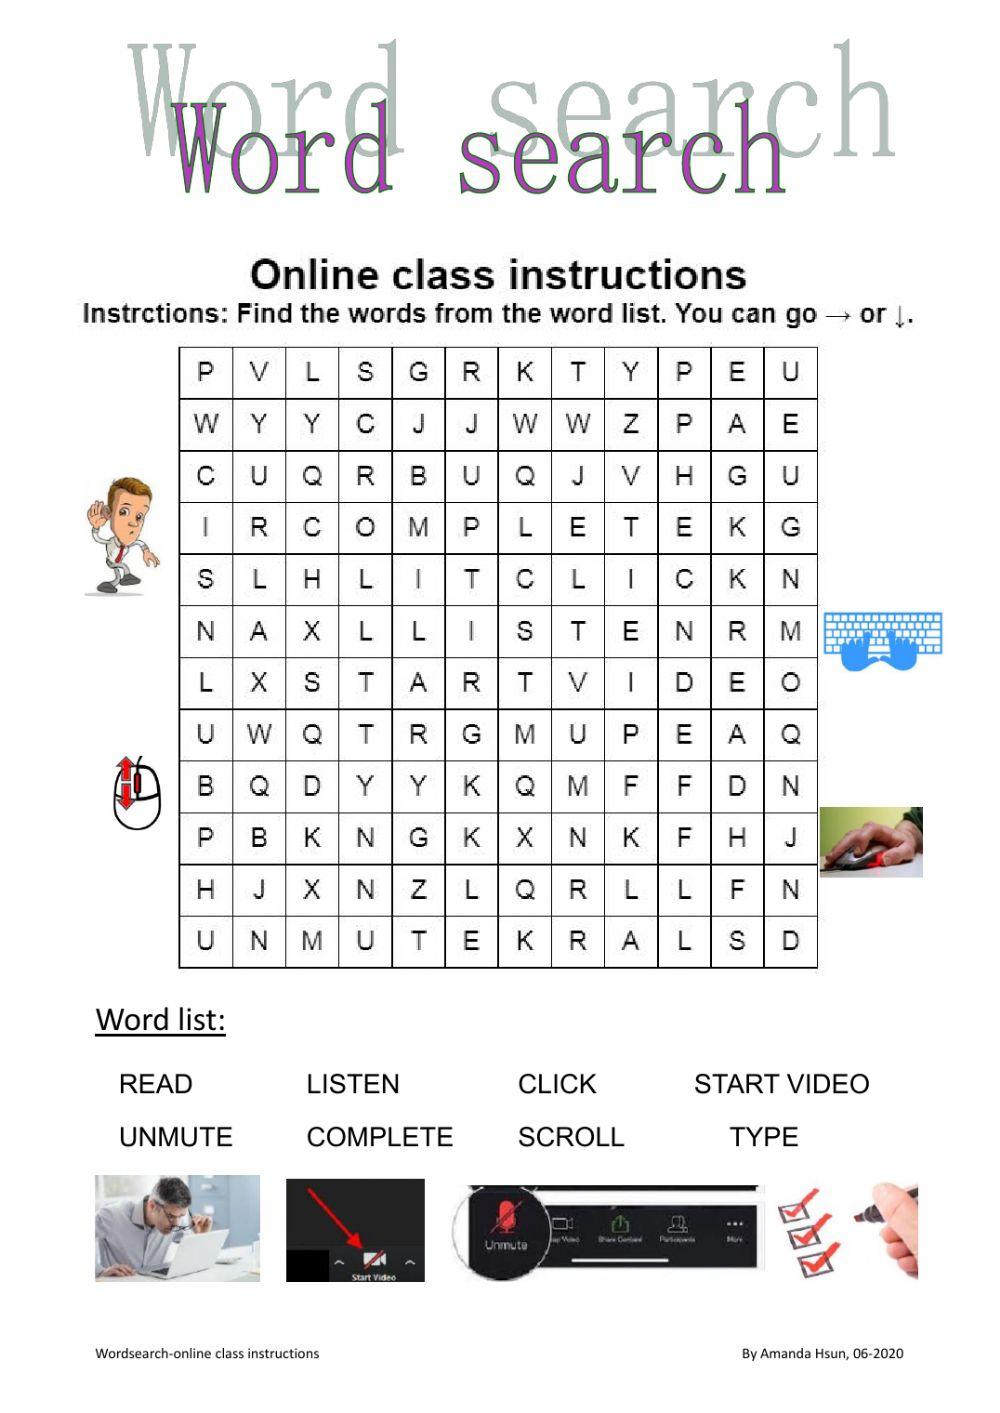 Wordsearch-online class instructions